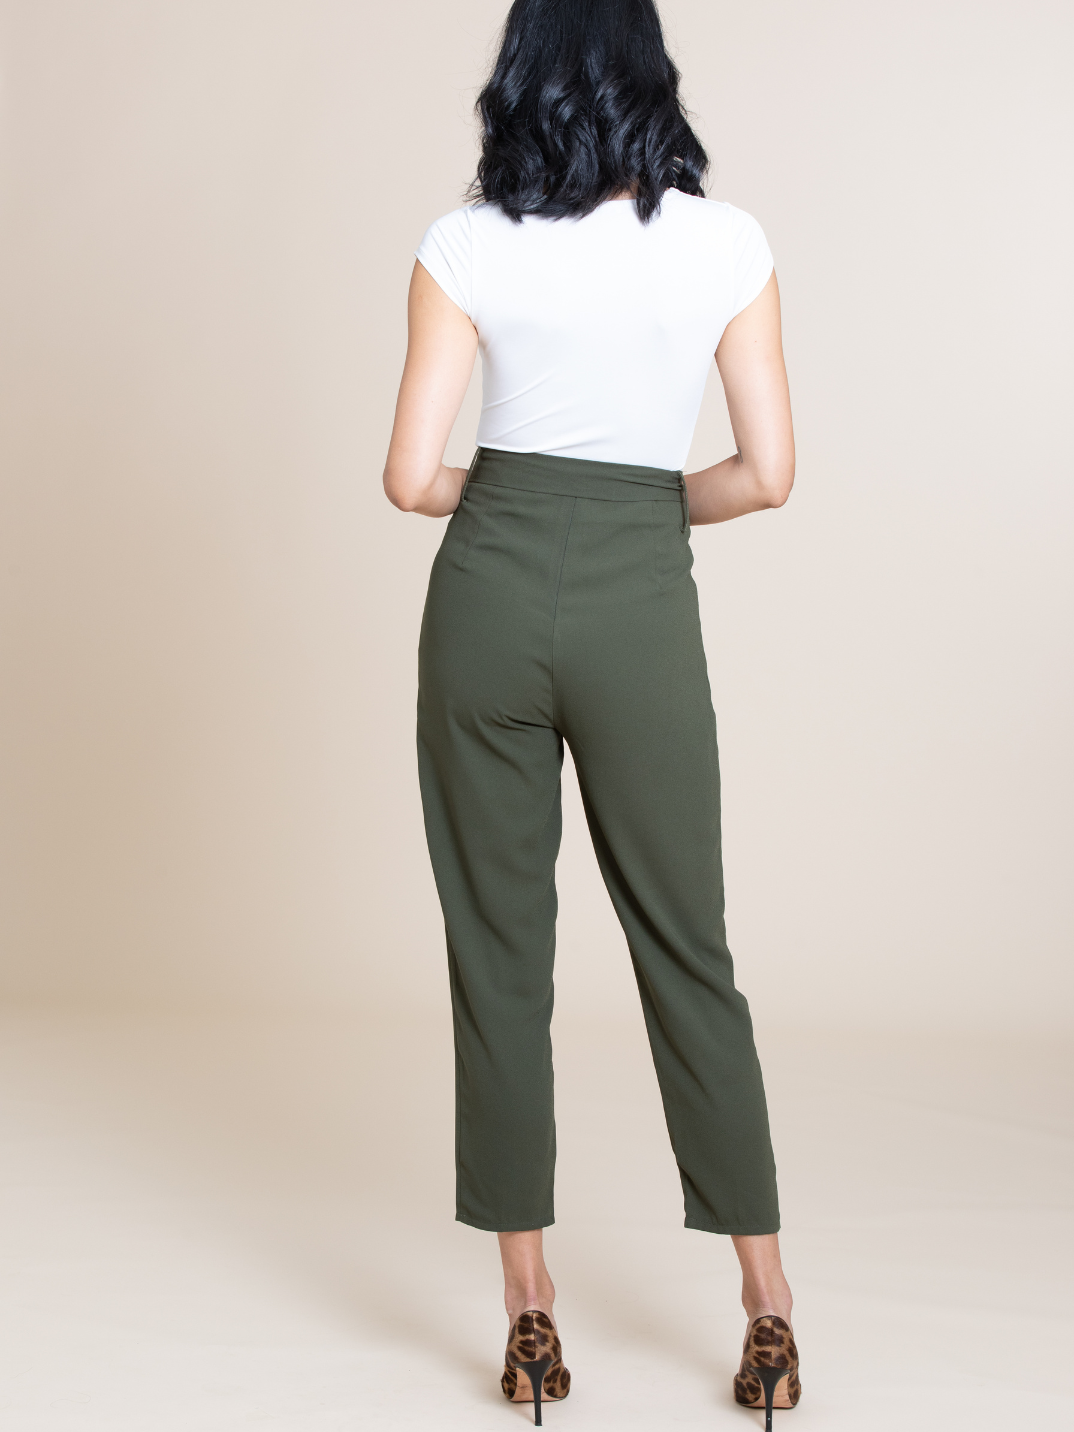 The most flattering trousers out there, we promise. The Lexi combine comfort and style with an easy-yet-sophisticated silhouette and paper bag waist. Pair with heels for work or throw on sneakers and the Kara bodysuit for casual comfort. Breathable and wrinkle-resistant fabric for 100% convenience.